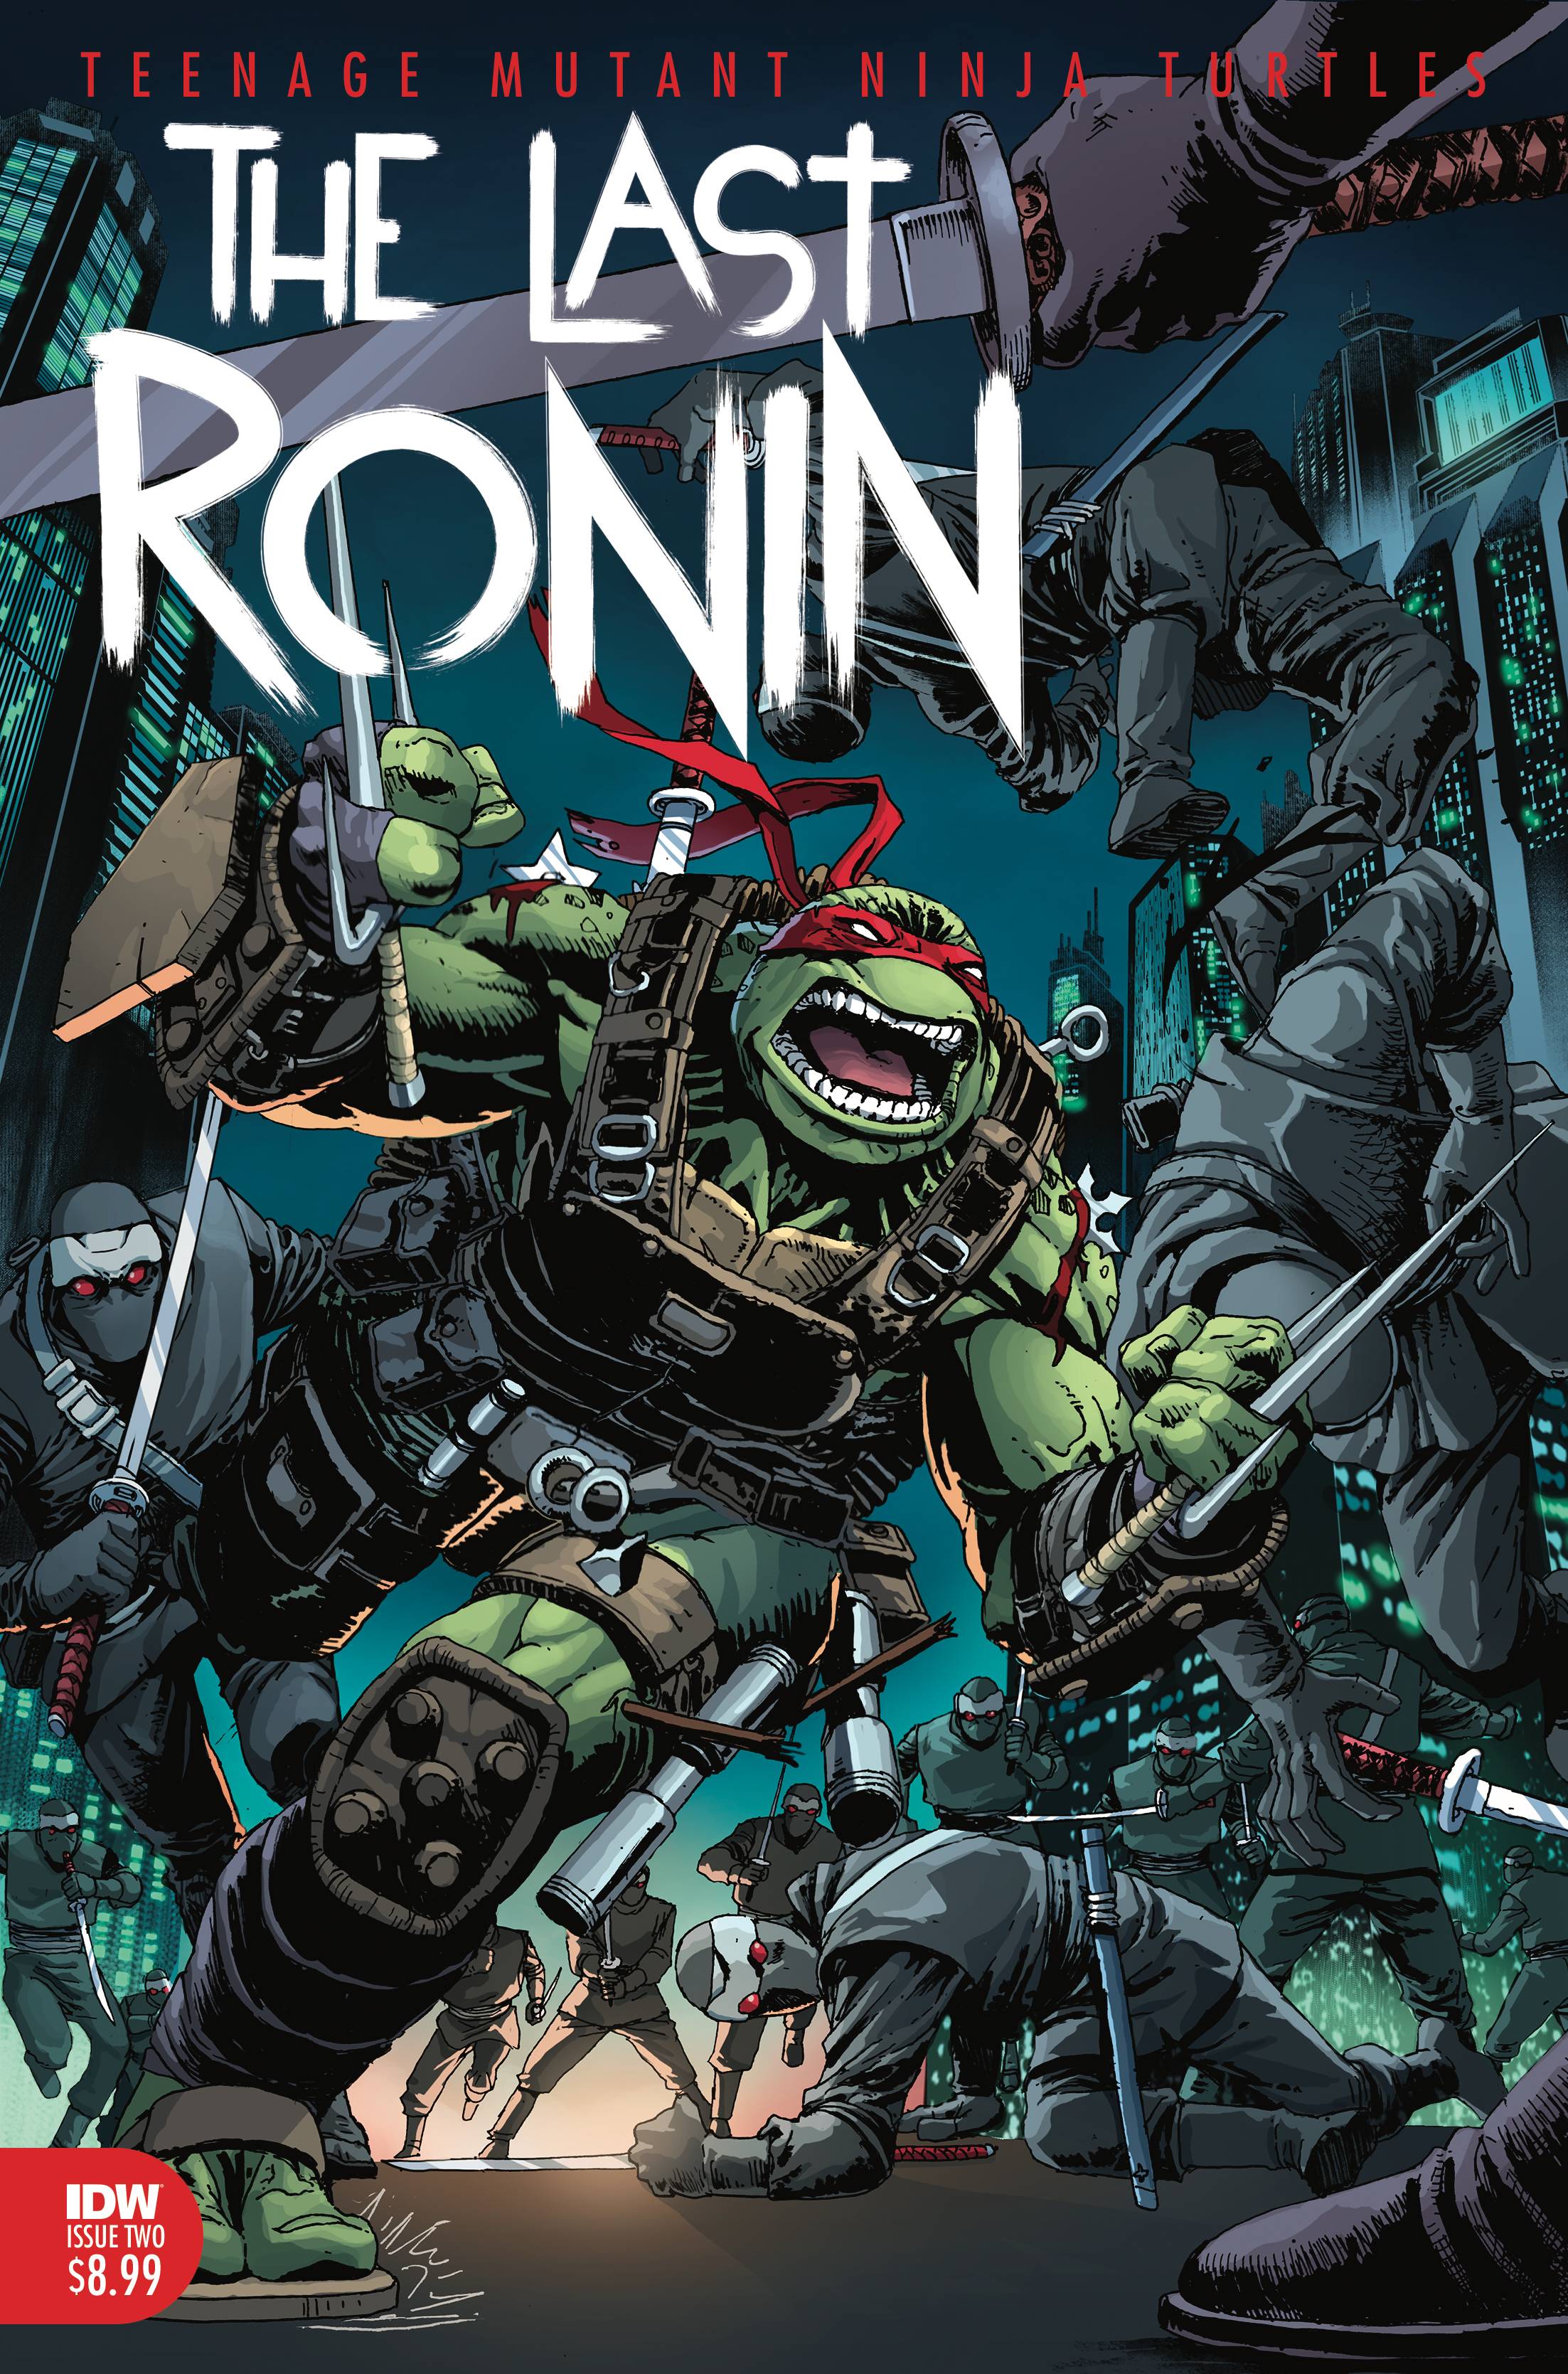 AUG200574 - TMNT THE LAST RONIN #2 (OF 5) - Free Comic Book Day